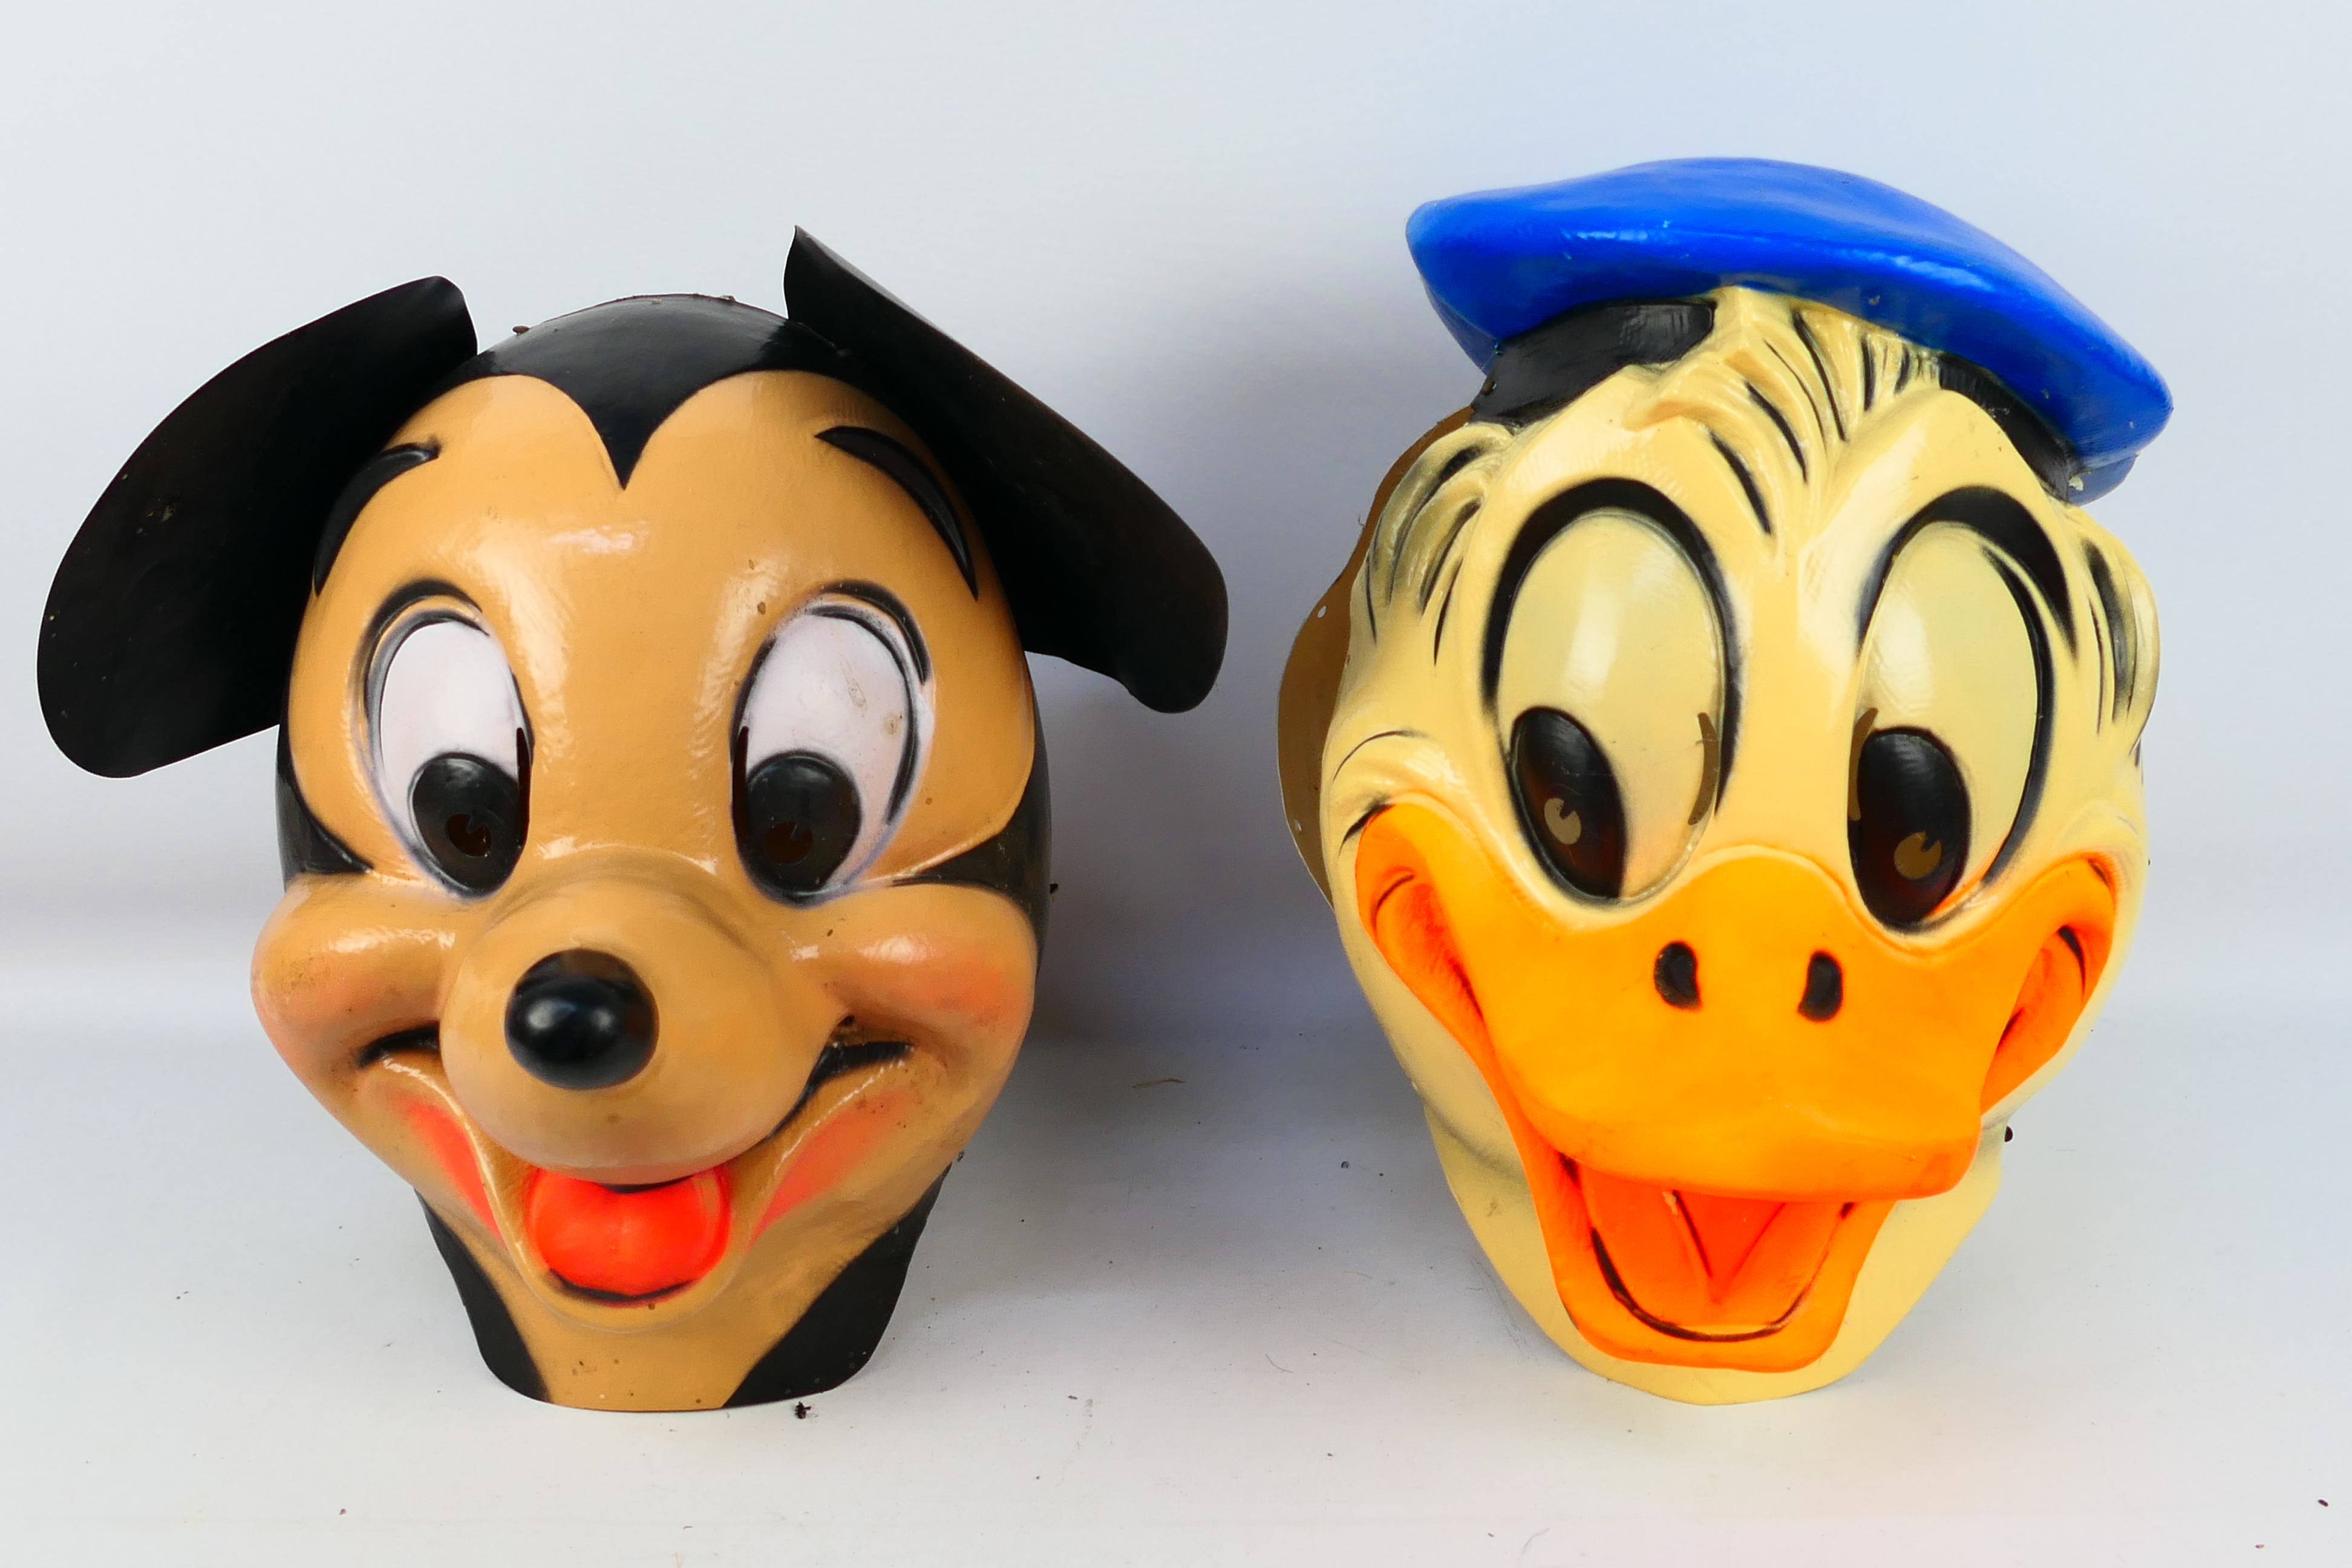 Disney - Mask - Costume - A pair of Disney Full head plastic masks comprising of Mickey Mouse and